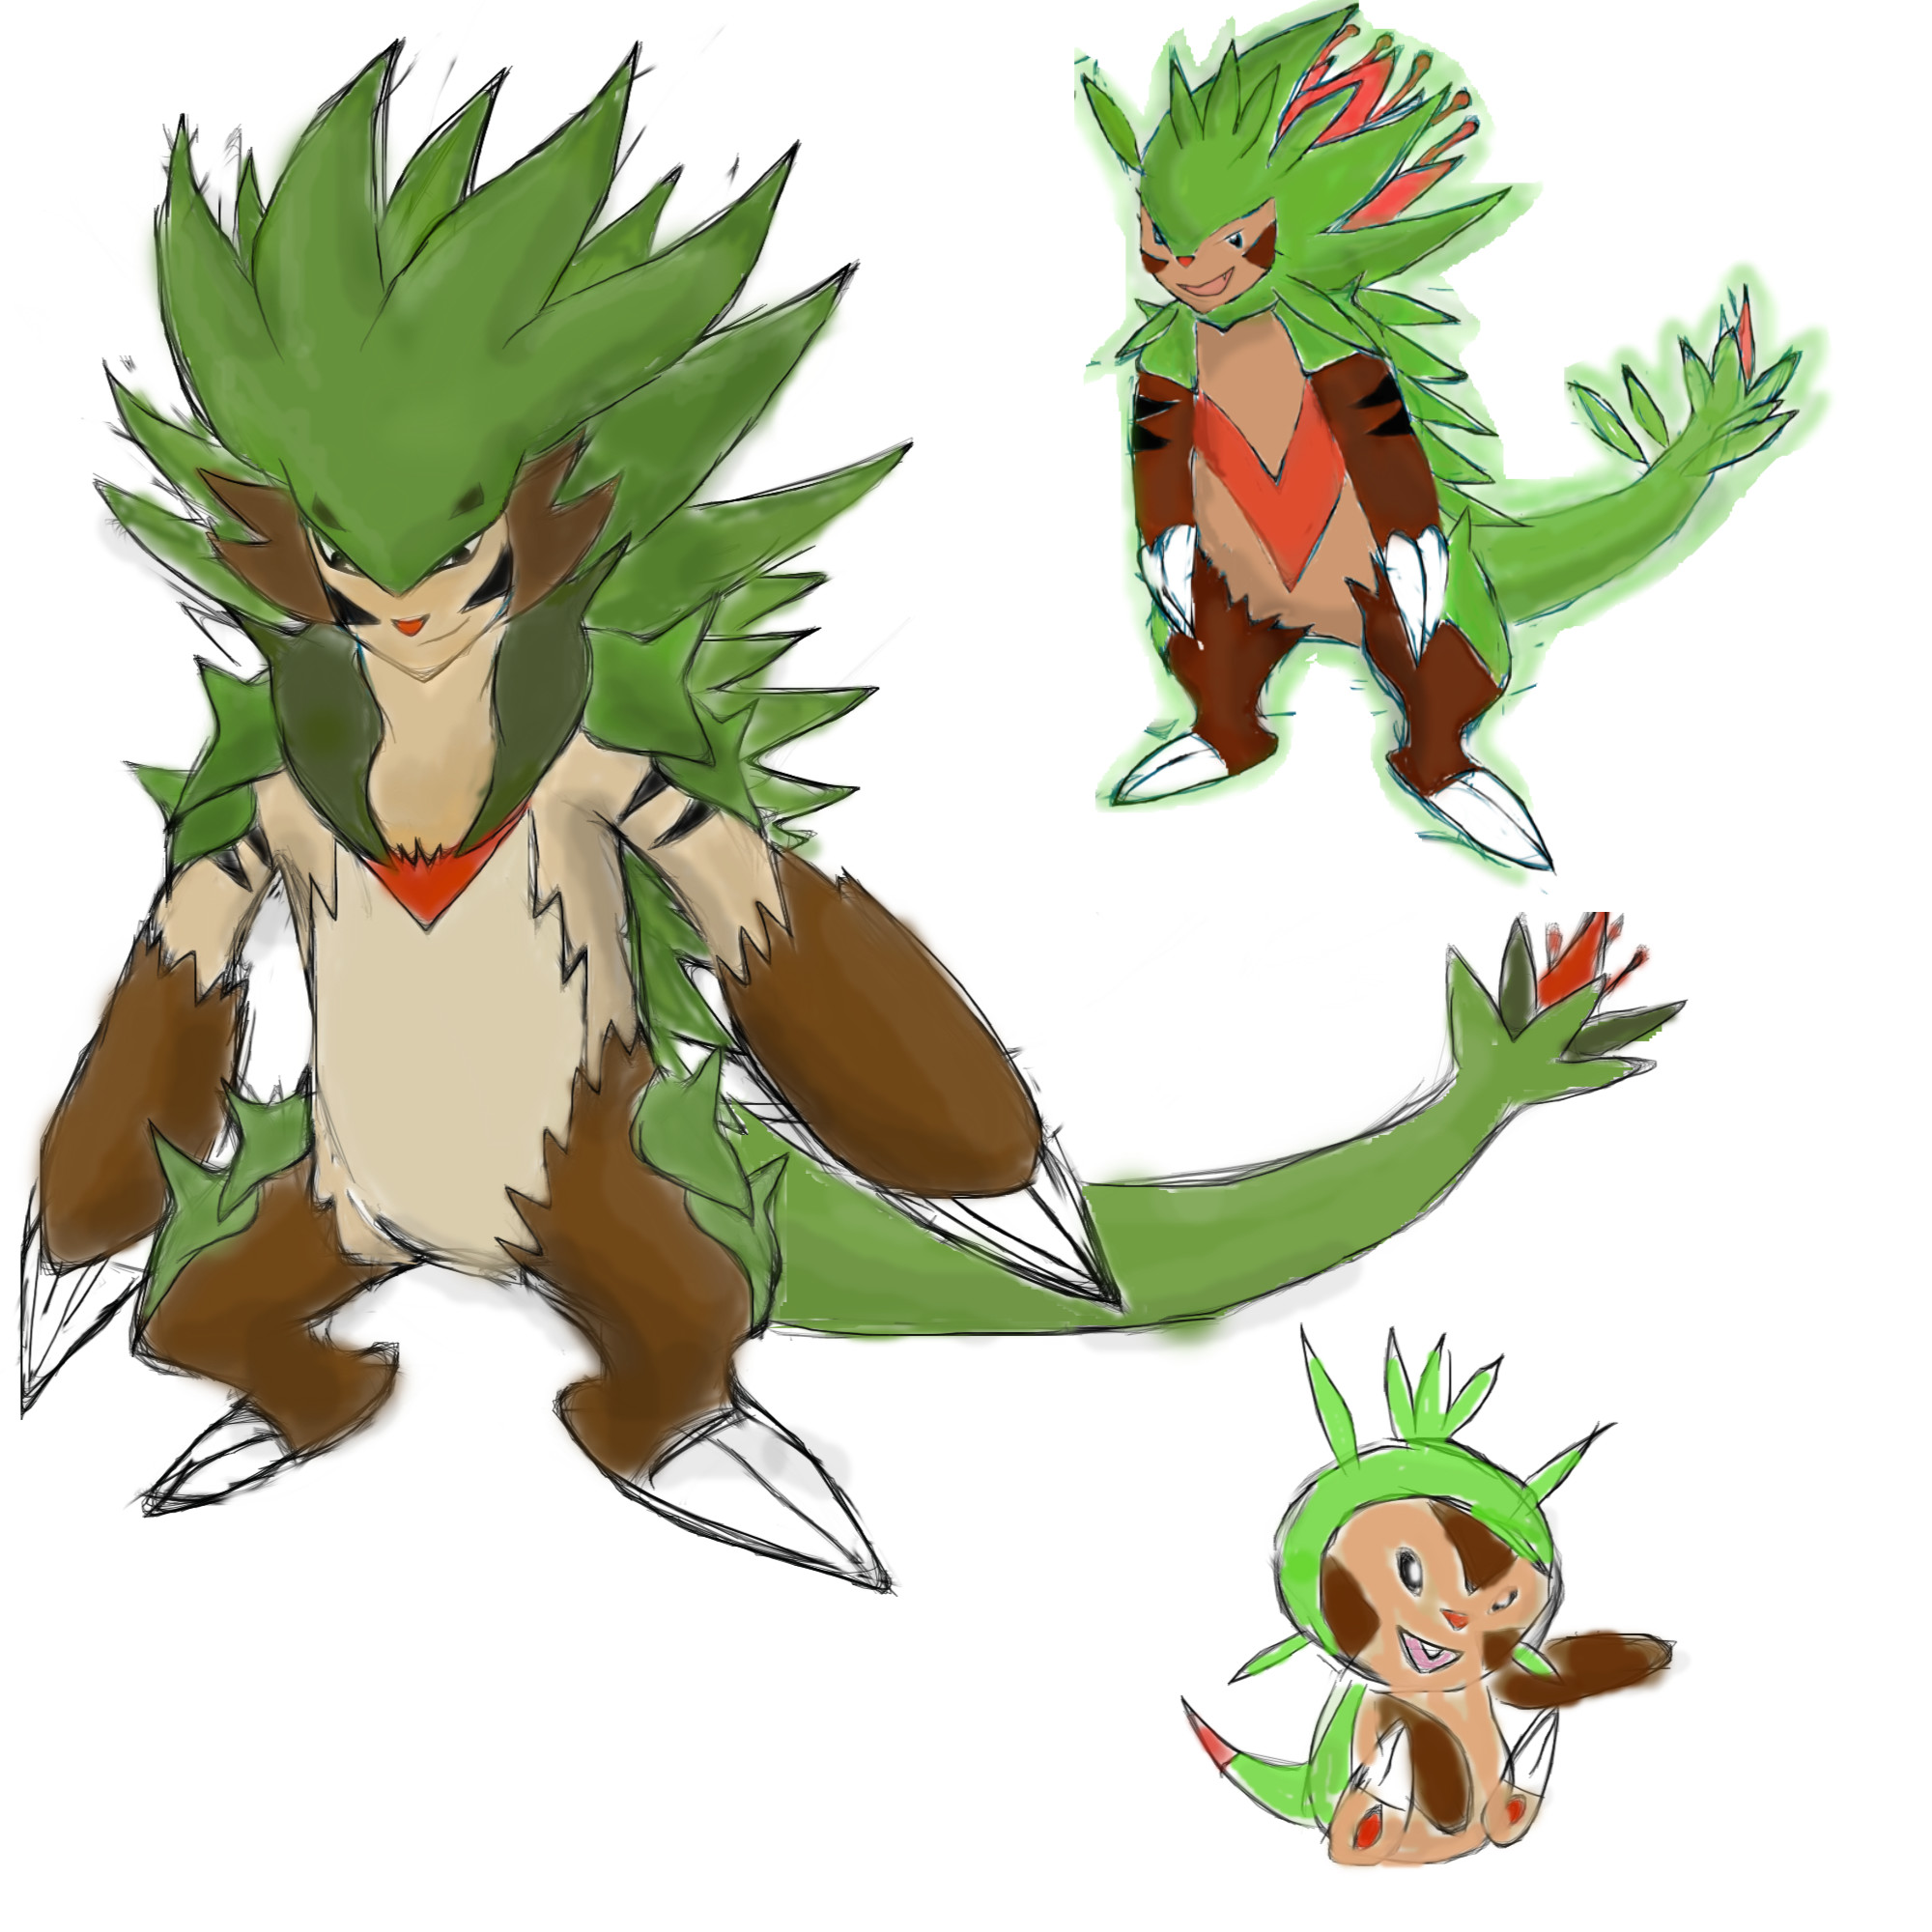 2000x2000 chespin evolution line by roblee96 chespin evolution line by roblee96